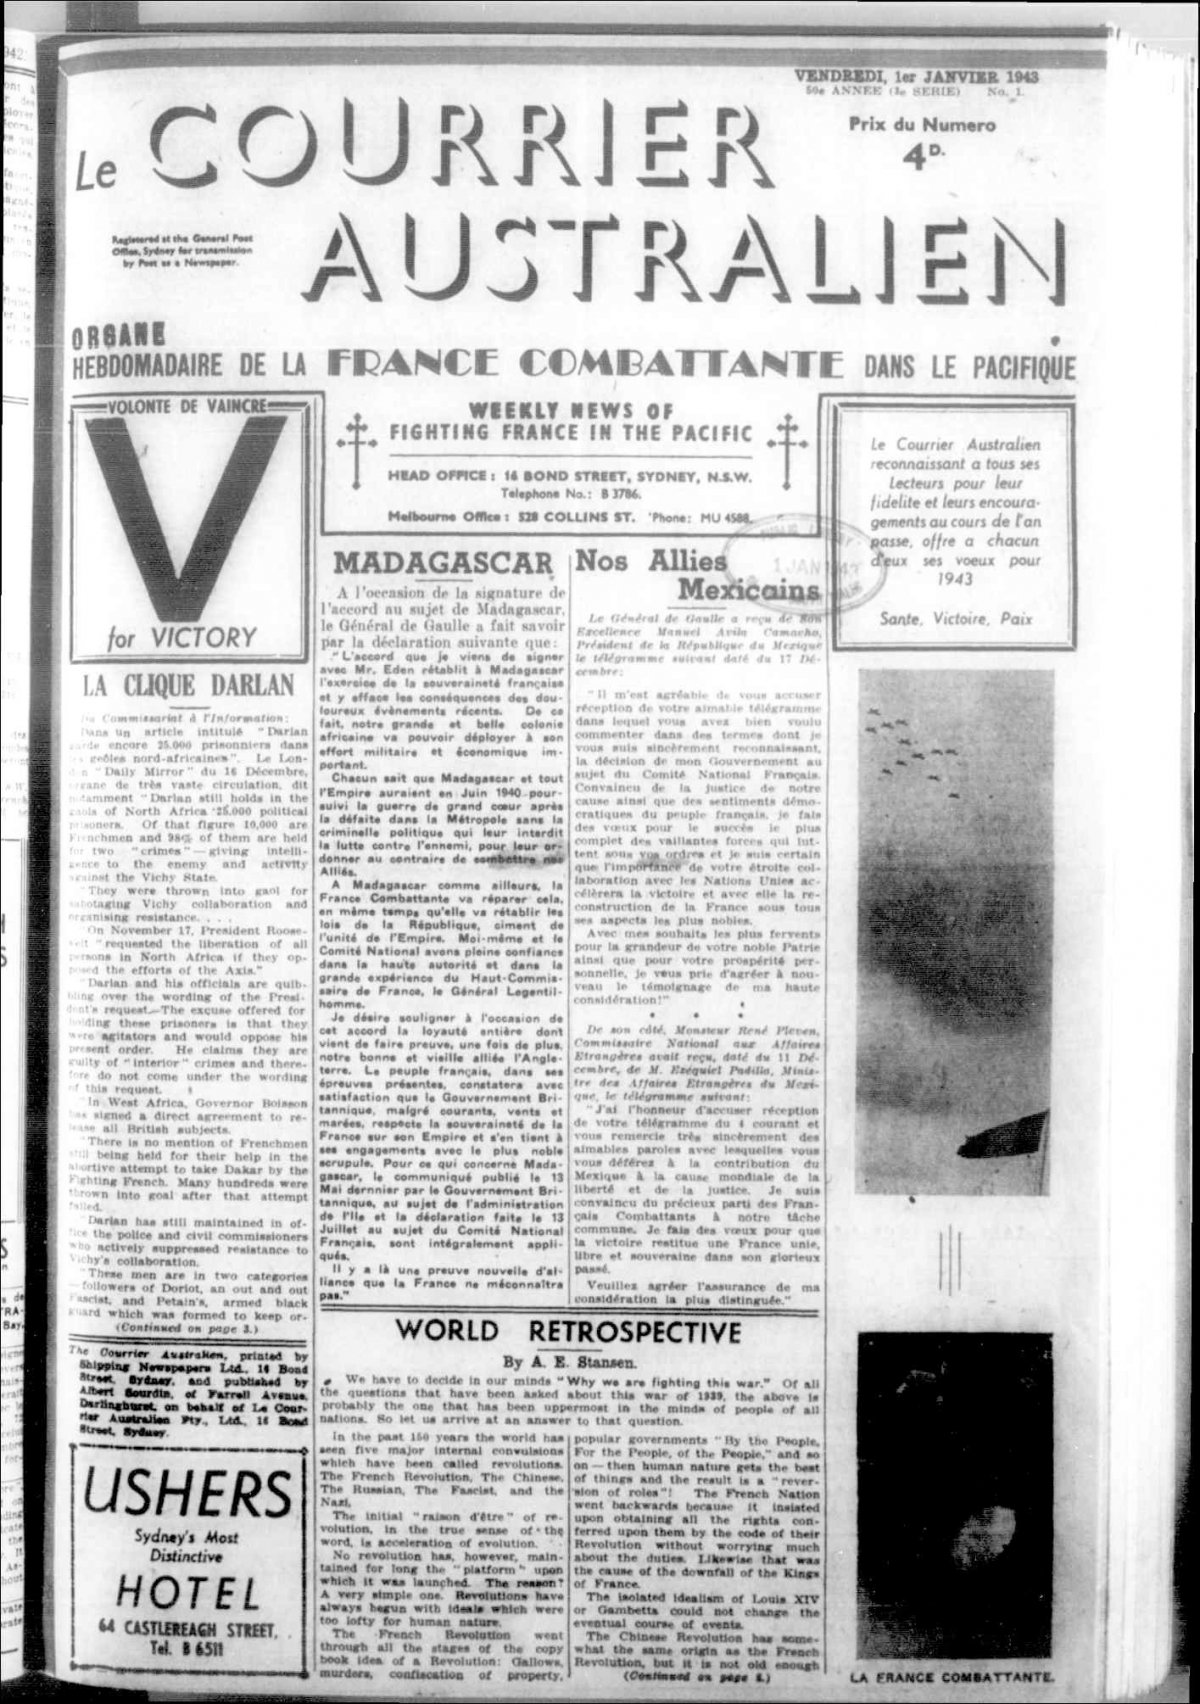 A page from a French newspaper titles Courrier Australien.